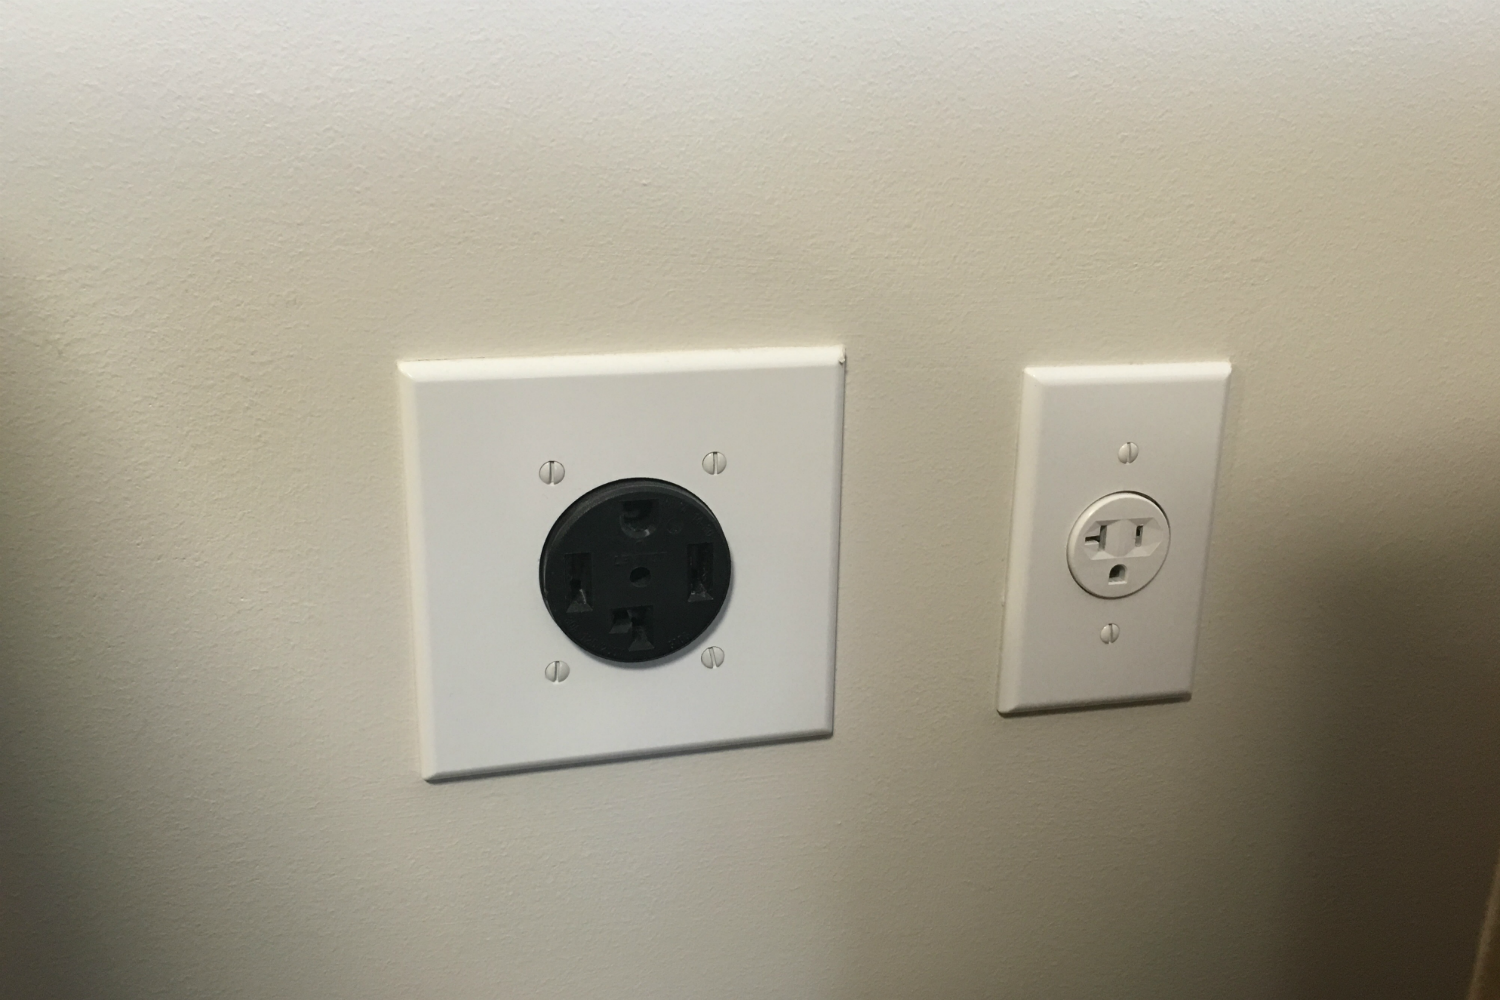 An electric and gas dryer outlet, on the left and right, respectively.